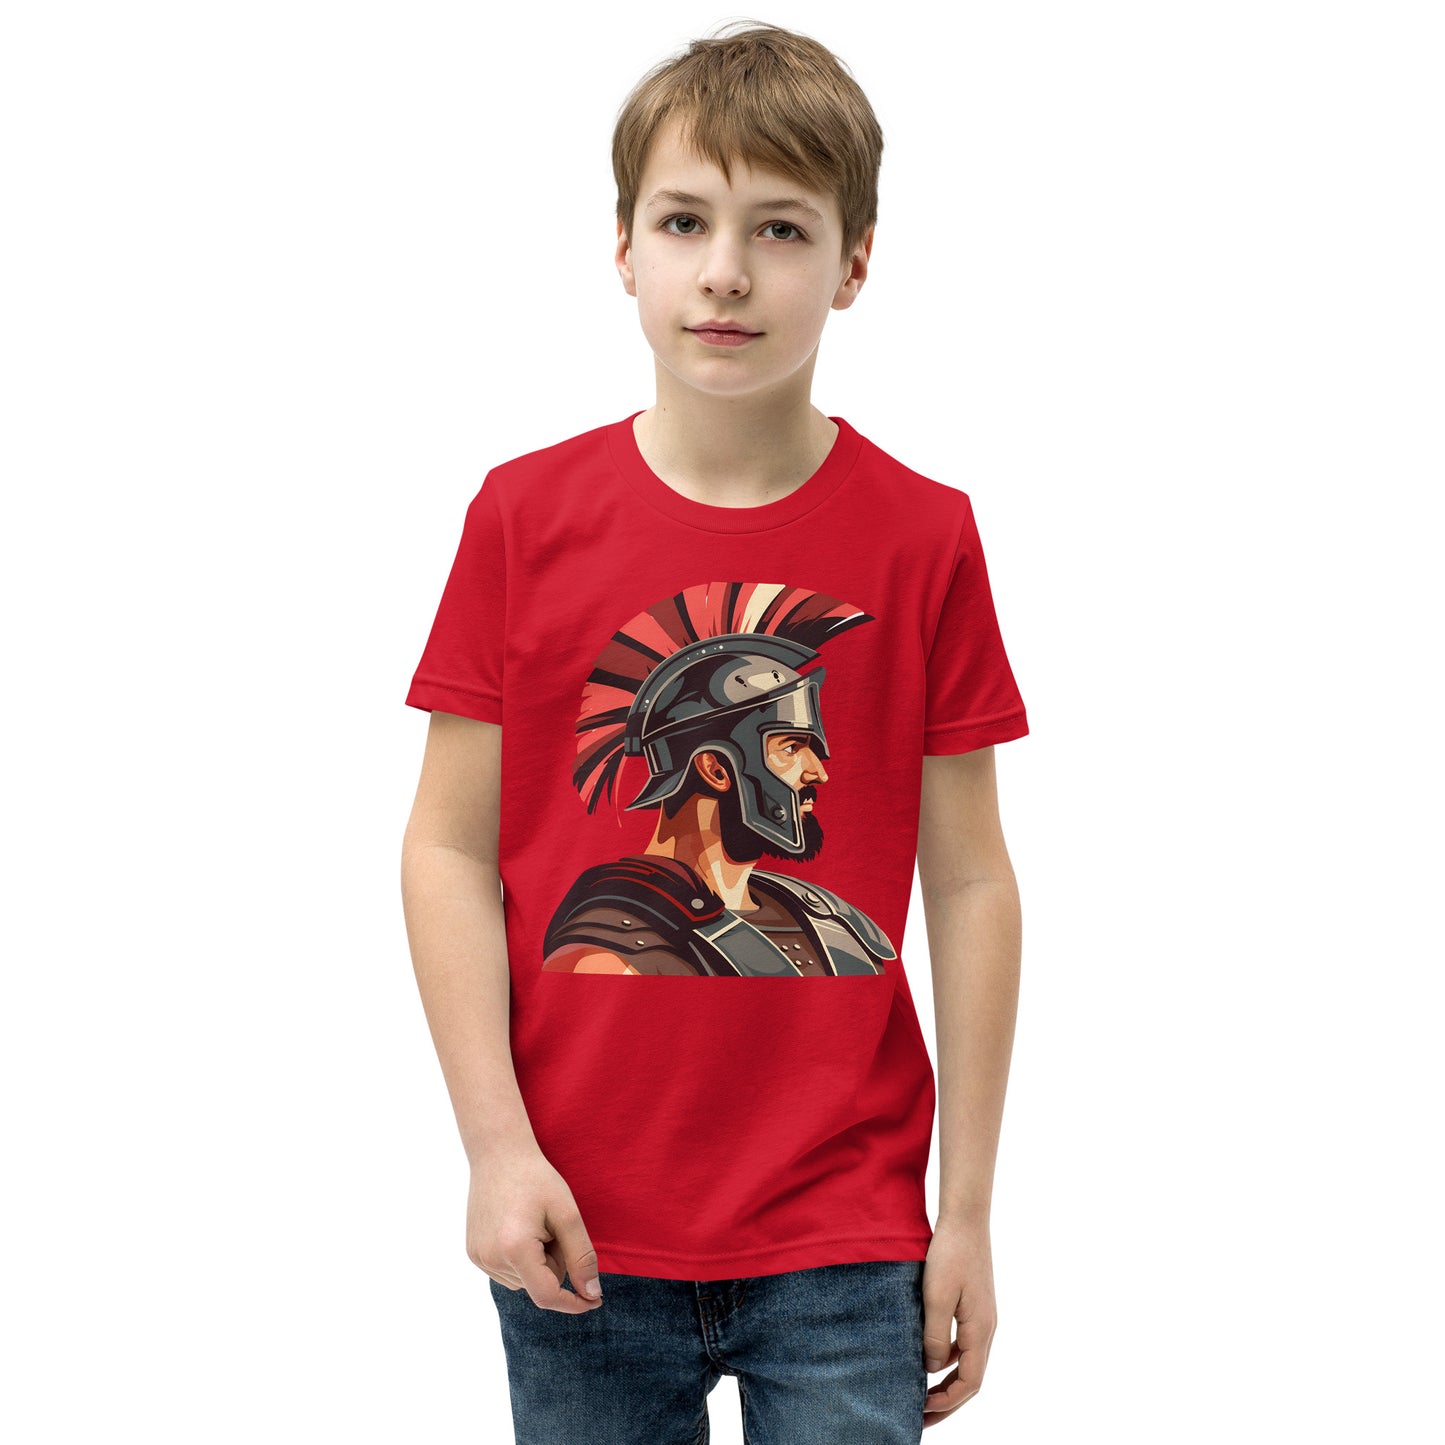 Teenager with a red T-shirt with a print of a warrior